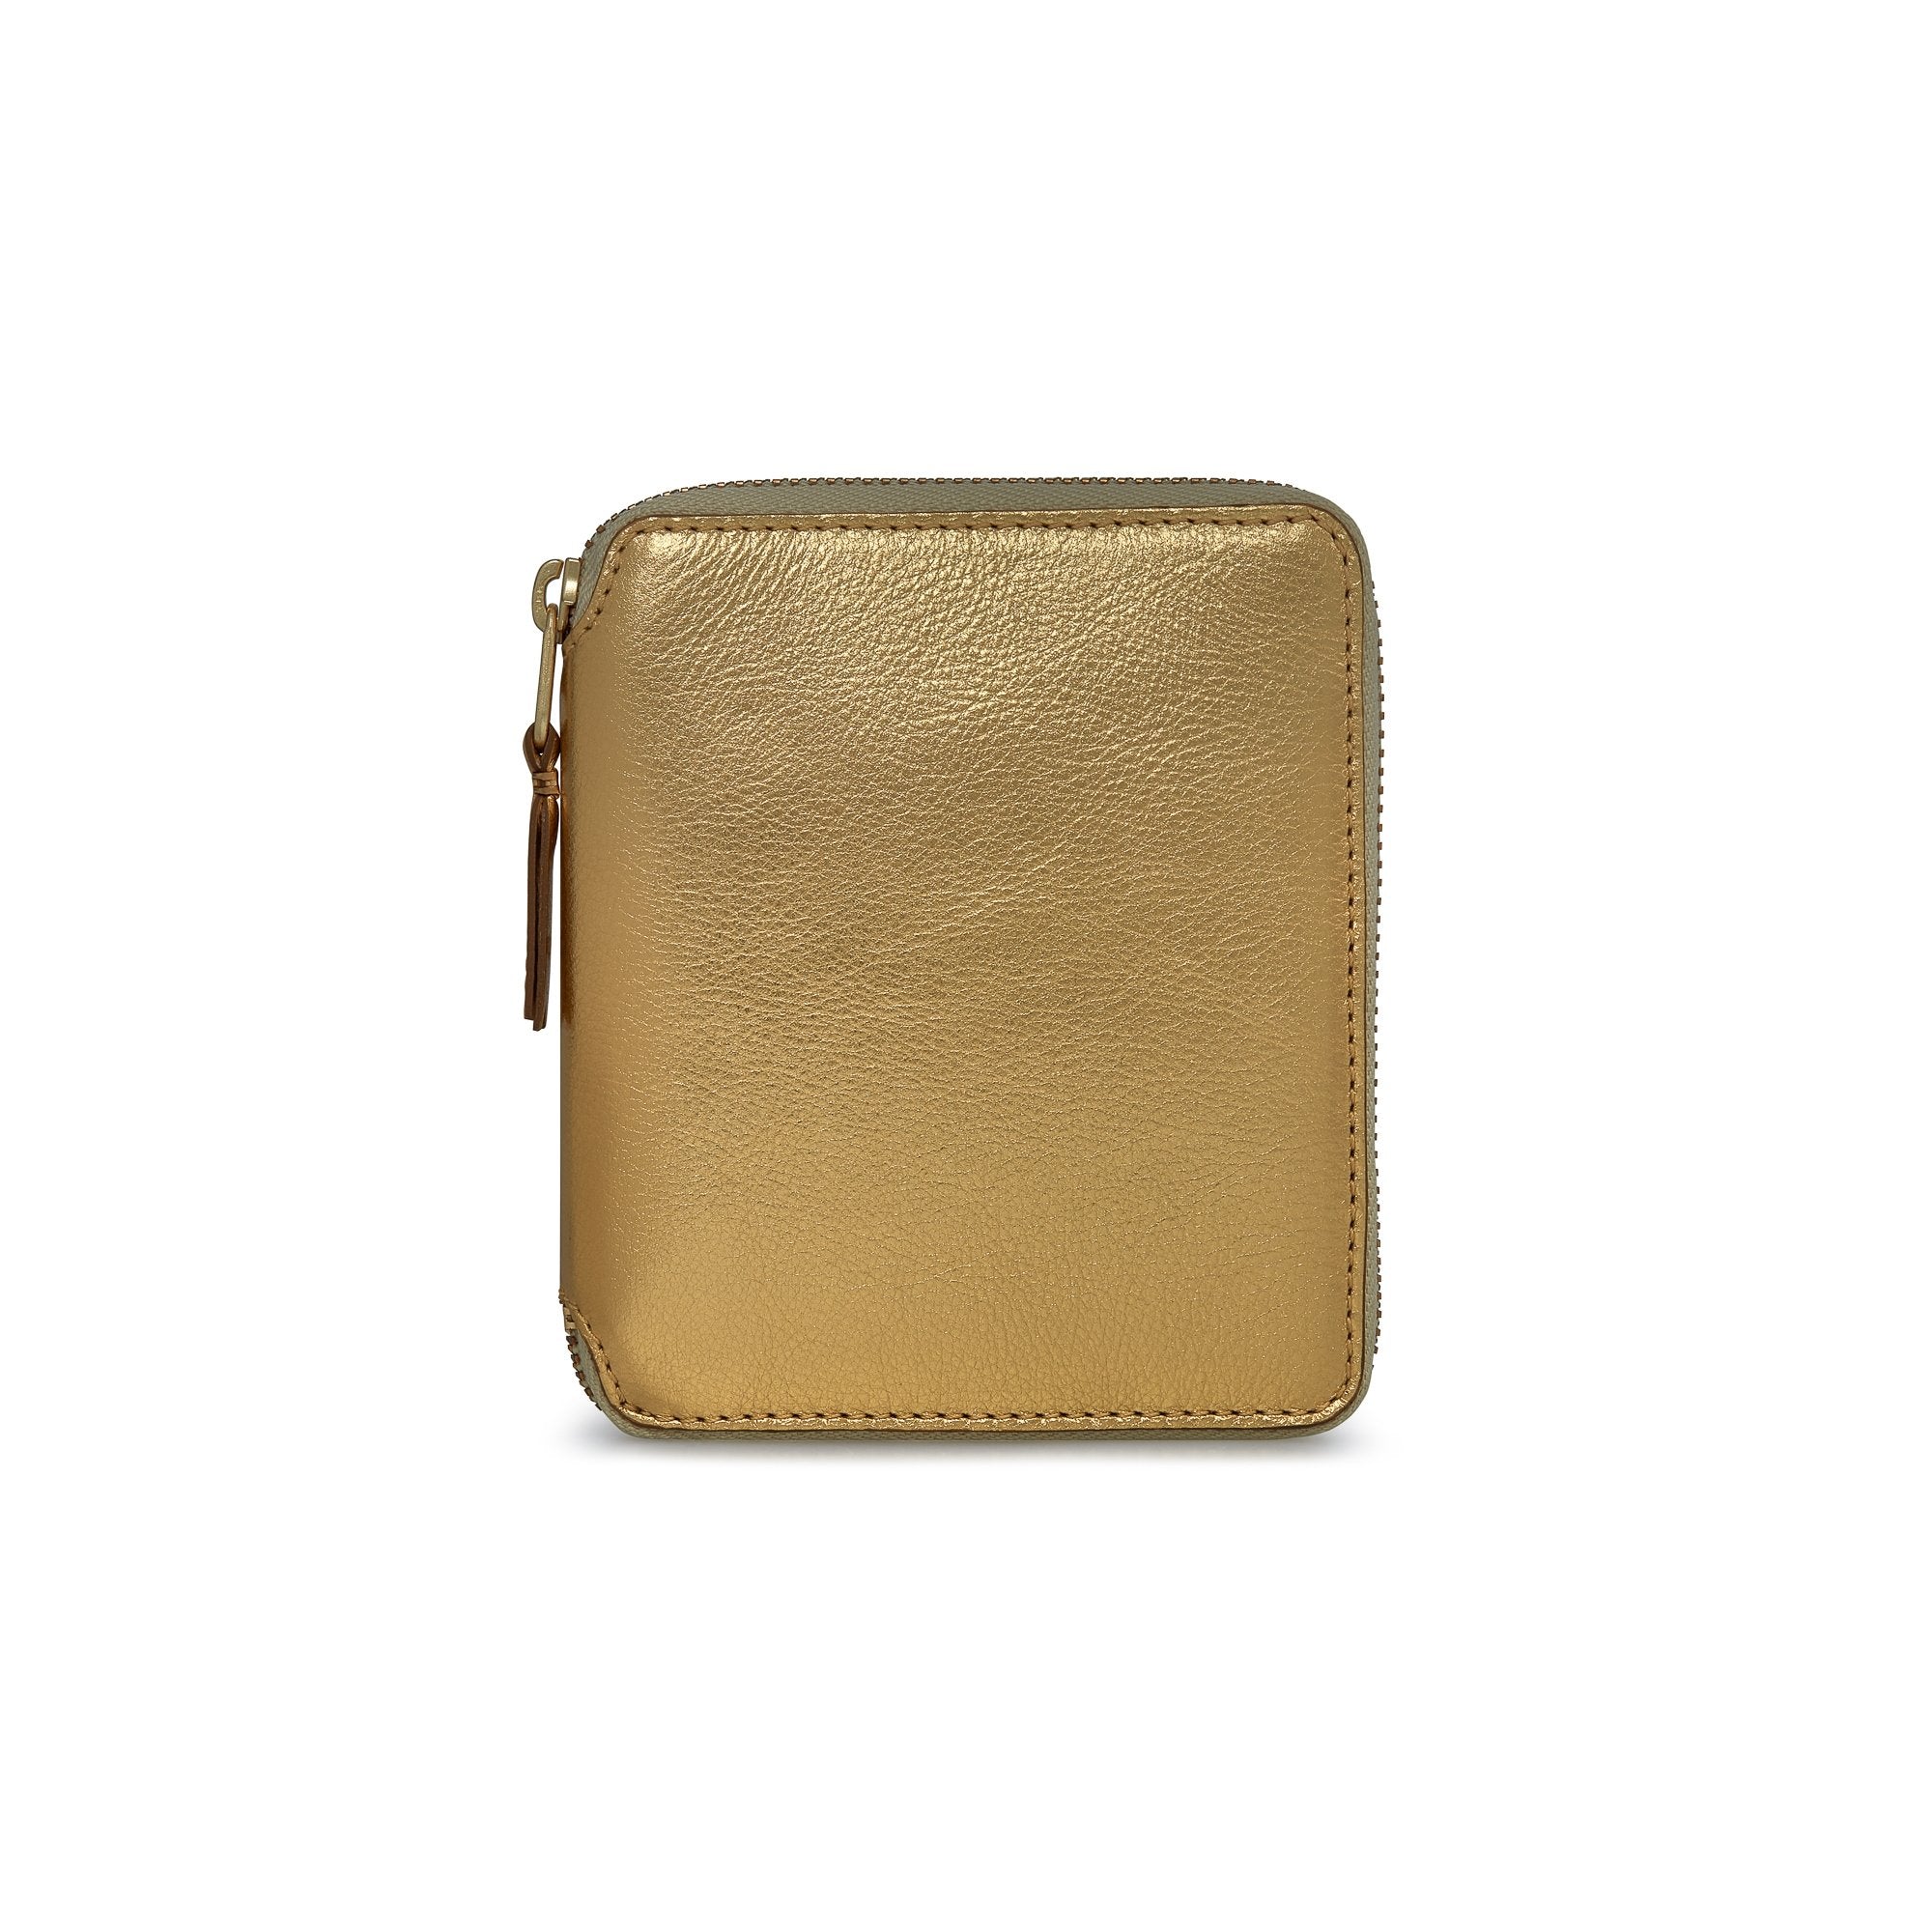 Gold and Silver Group Wallet 2100GSG